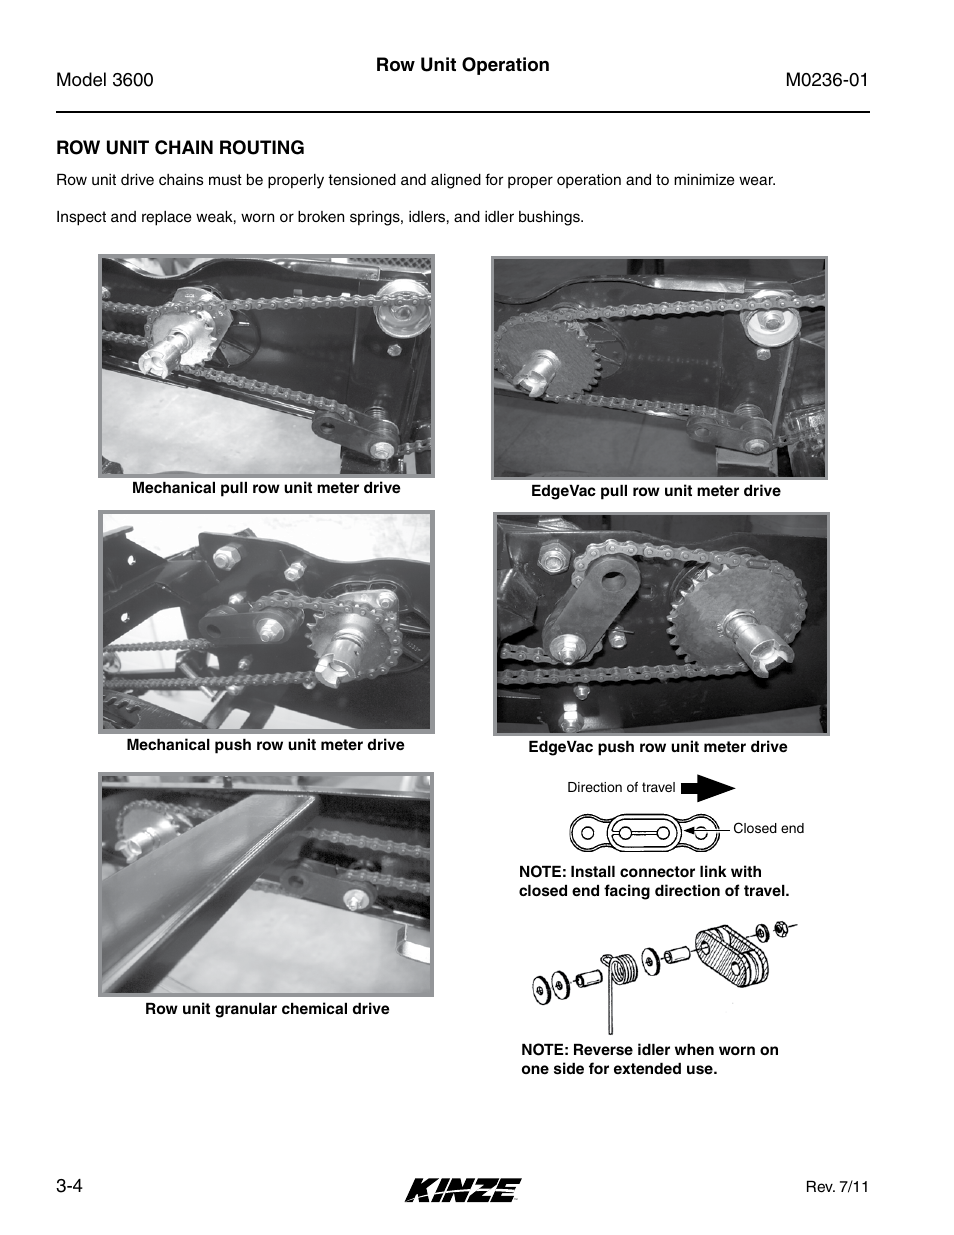 Row unit chain routing, Row unit chain routing -4 | Kinze 3600 Lift and Rotate Planter Rev. 7/14 User Manual | Page 48 / 172